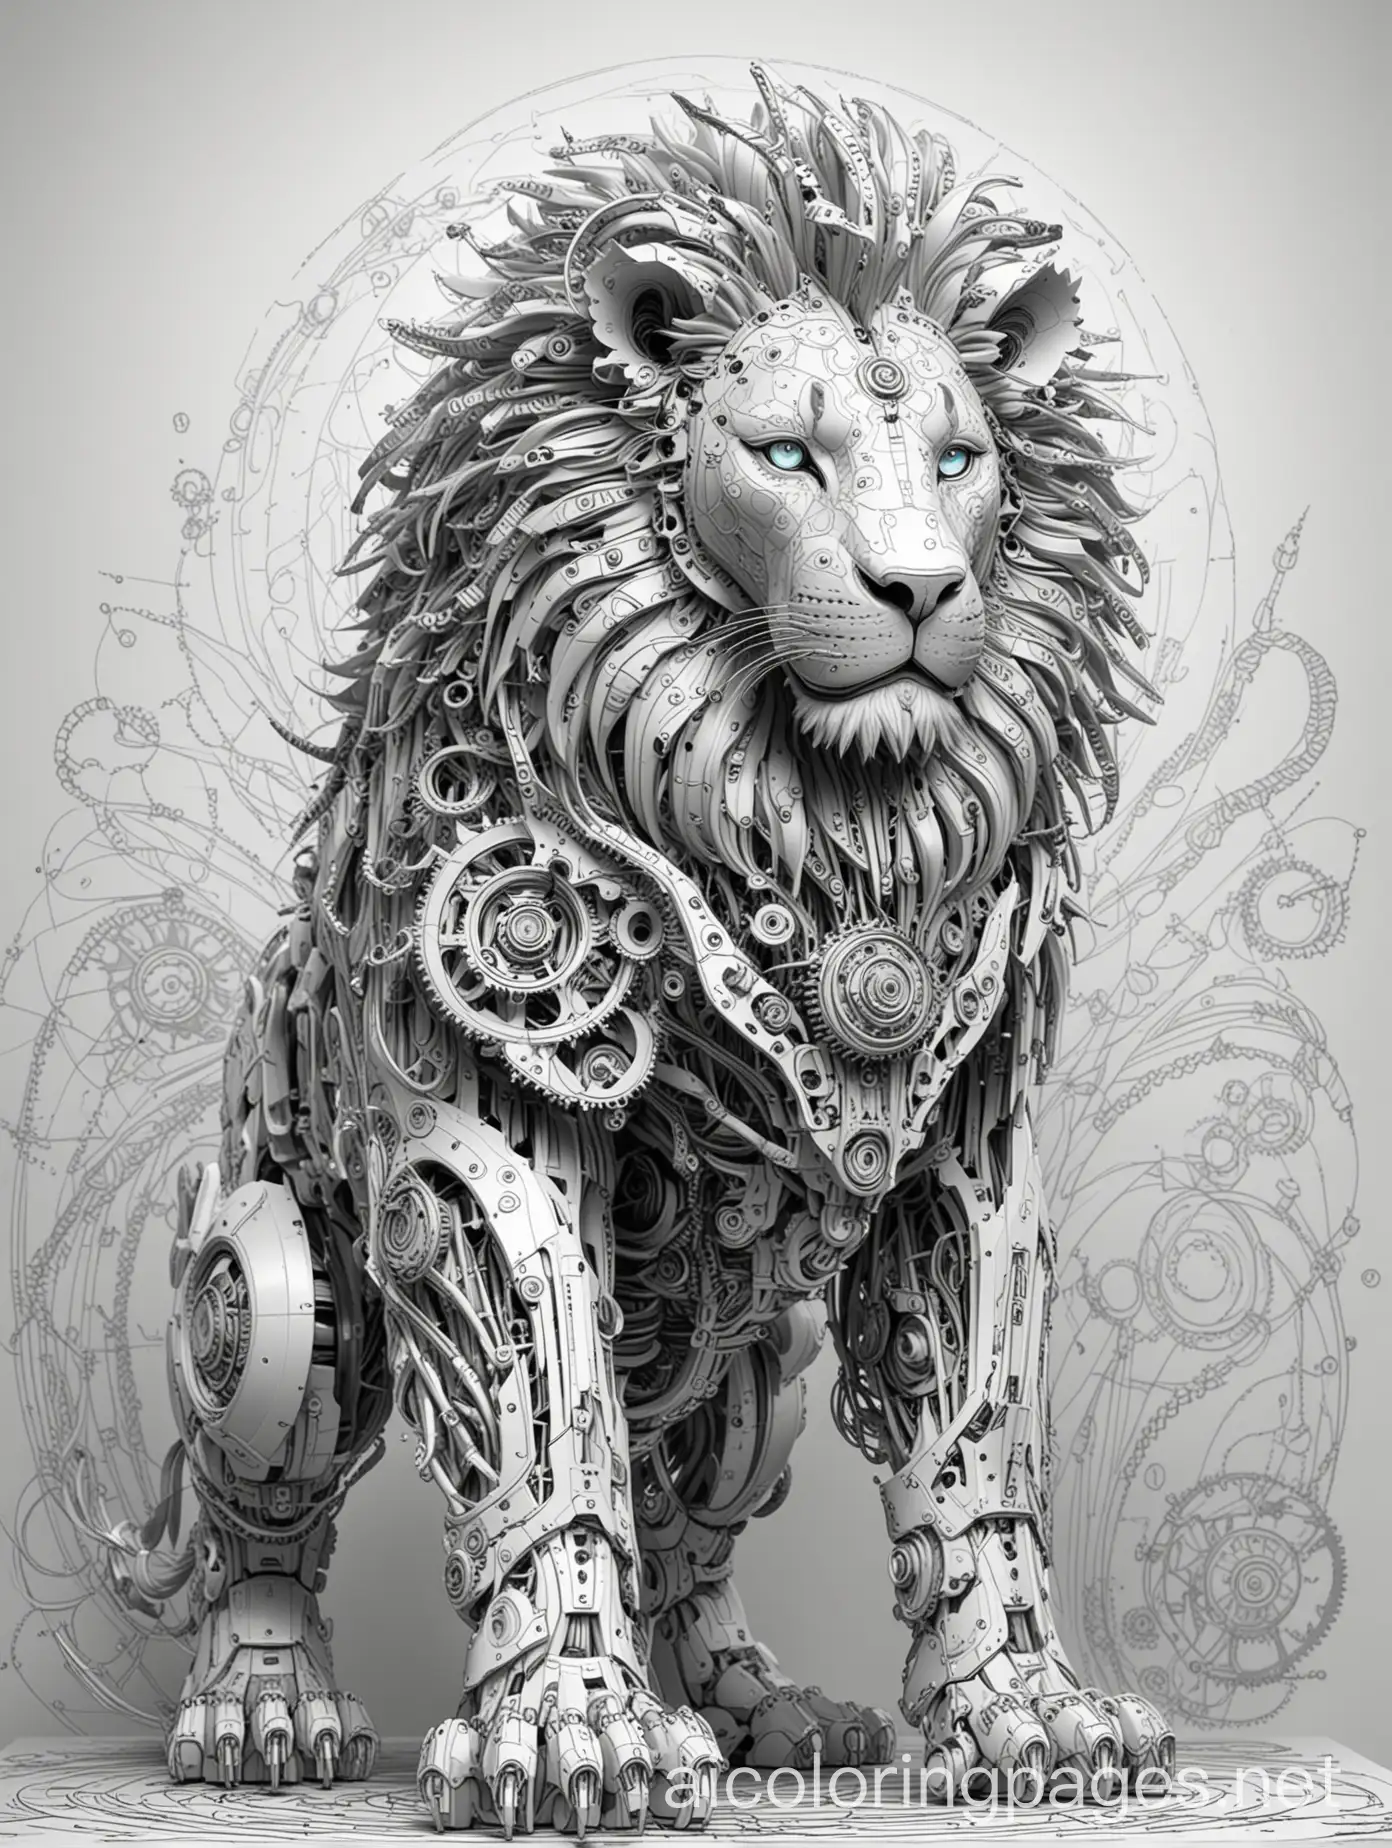 A regal Robo-Lion, its mane intricately composed of gears and wires, exuding power and strength as it gazes into the distance with glowing optics., Coloring Page, black and white, line art, white background, Simplicity, Ample White Space. The background of the coloring page is plain white to make it easy for young children to color within the lines. The outlines of all the subjects are easy to distinguish, making it simple for kids to color without too much difficulty